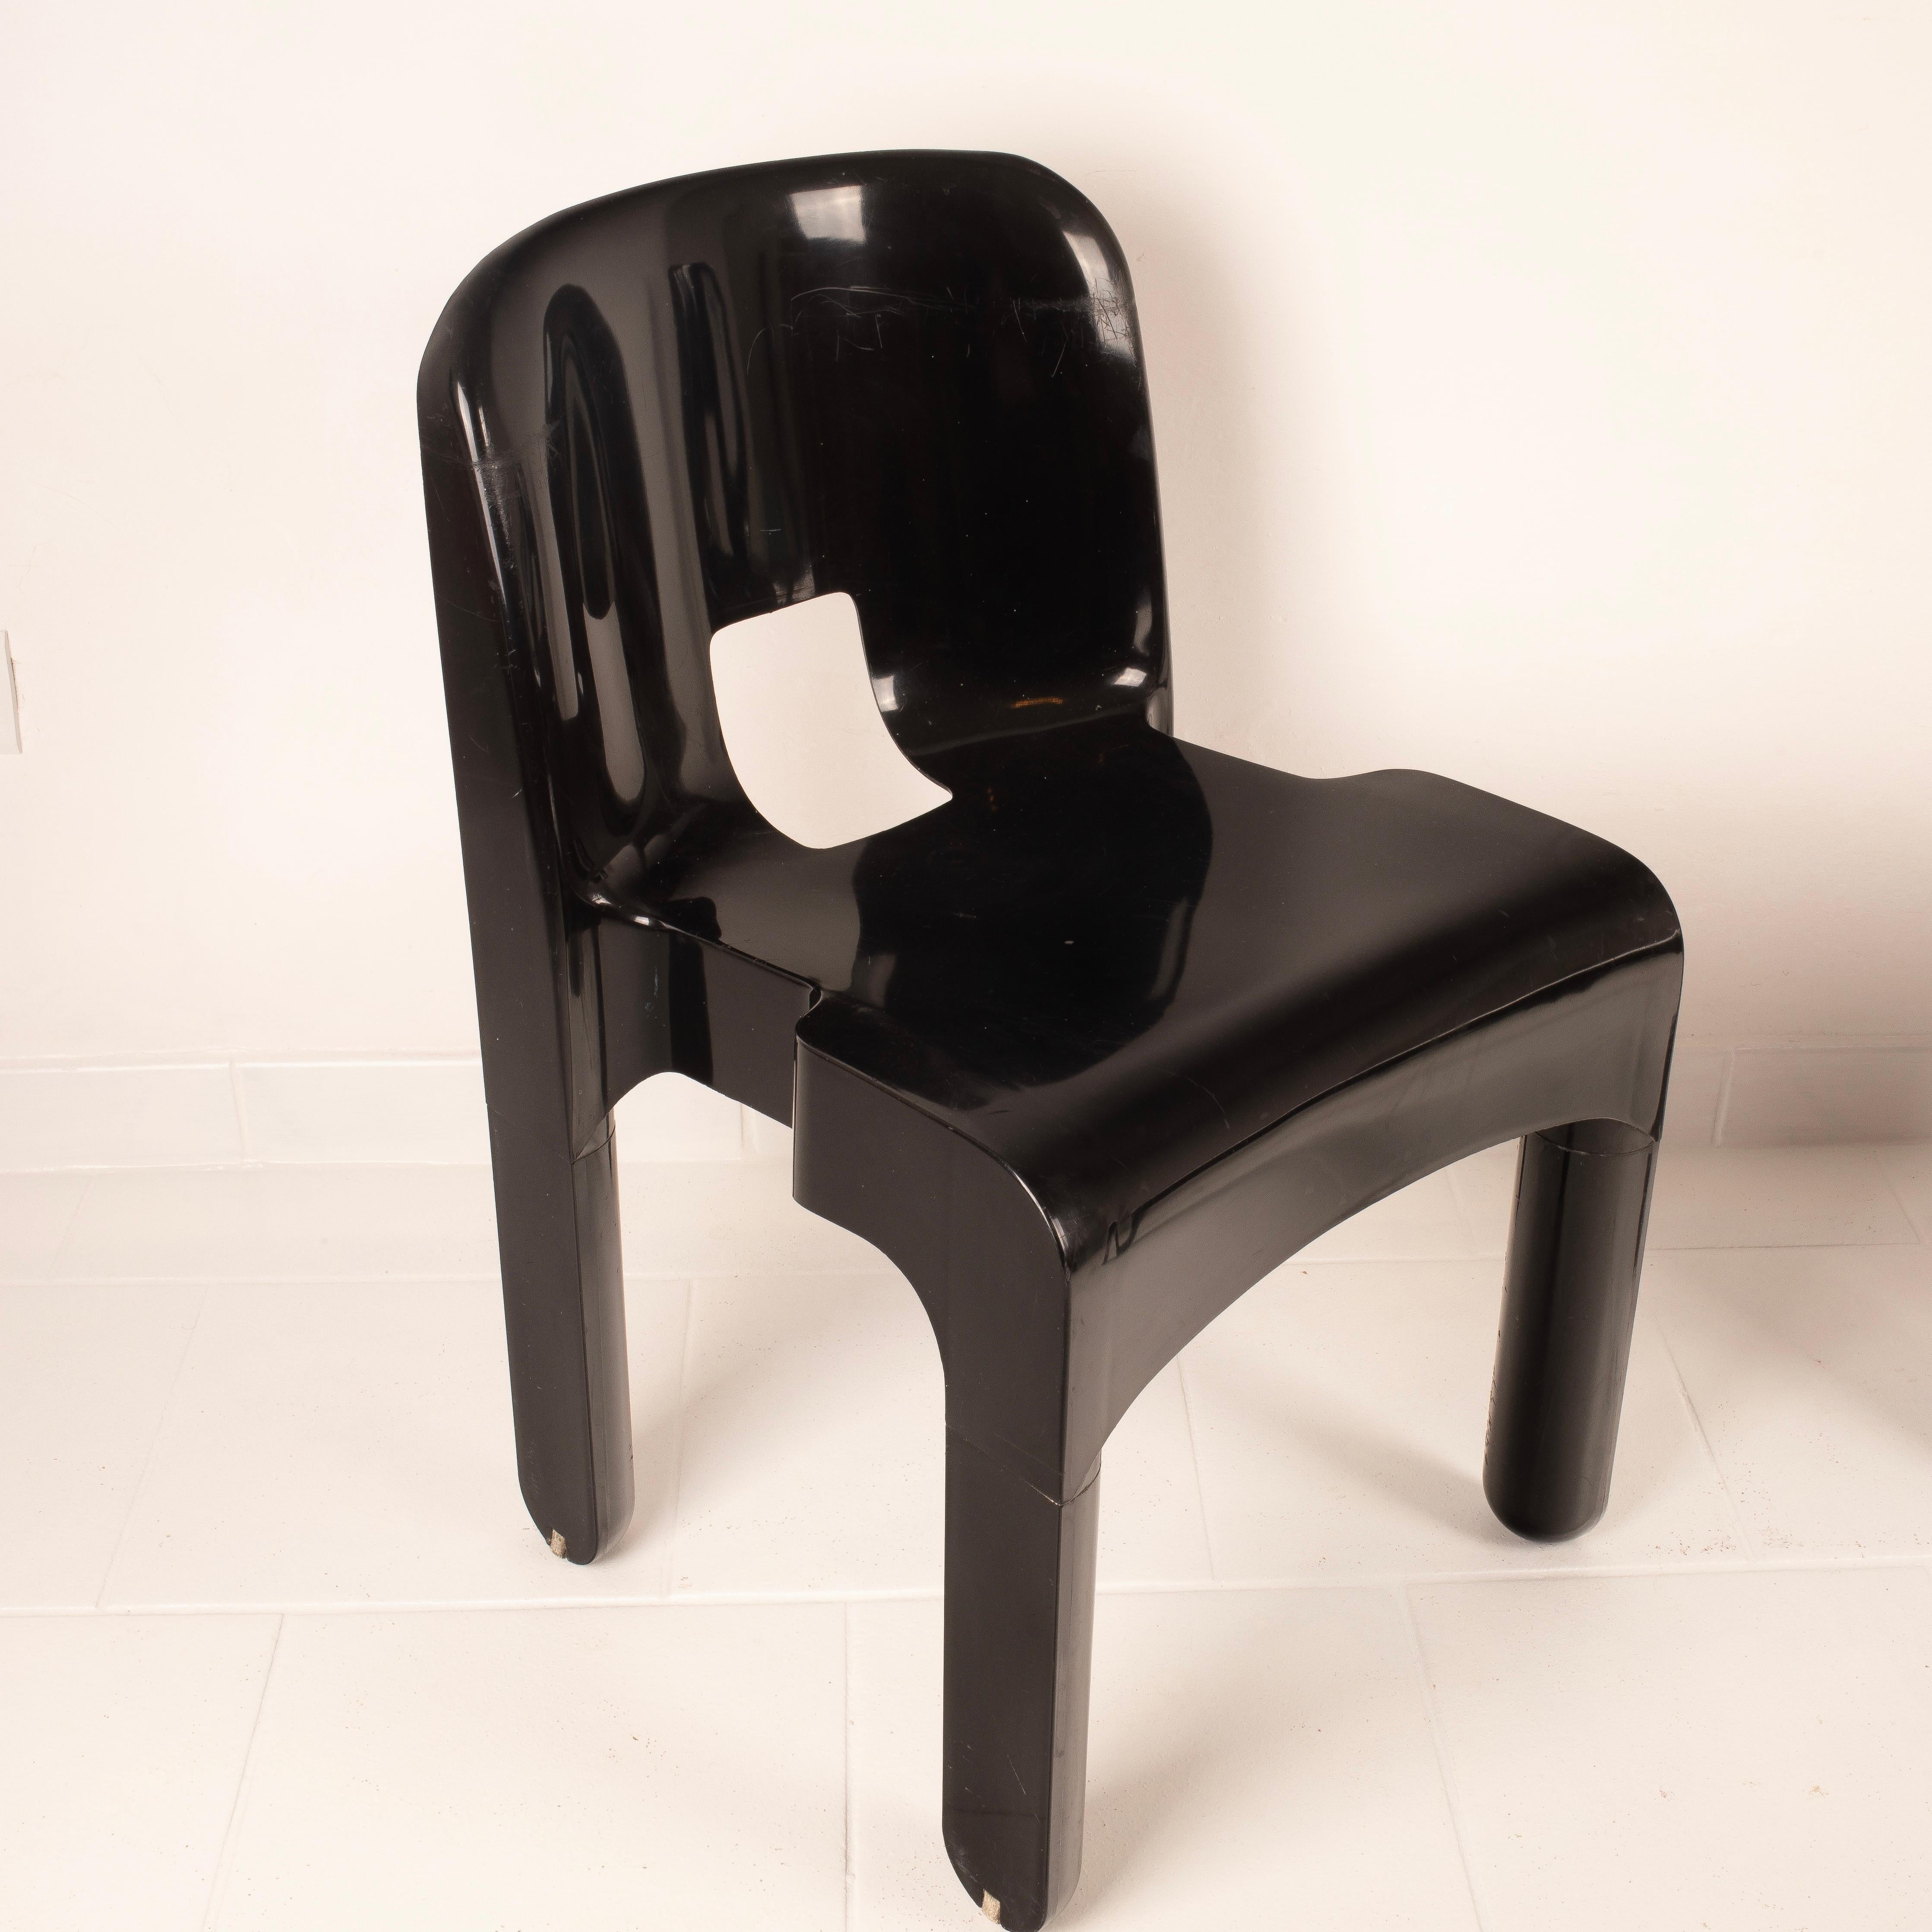 Plastic Pair of Universal Chairs 4869 Black by Joe Colombo for Kartell For Sale